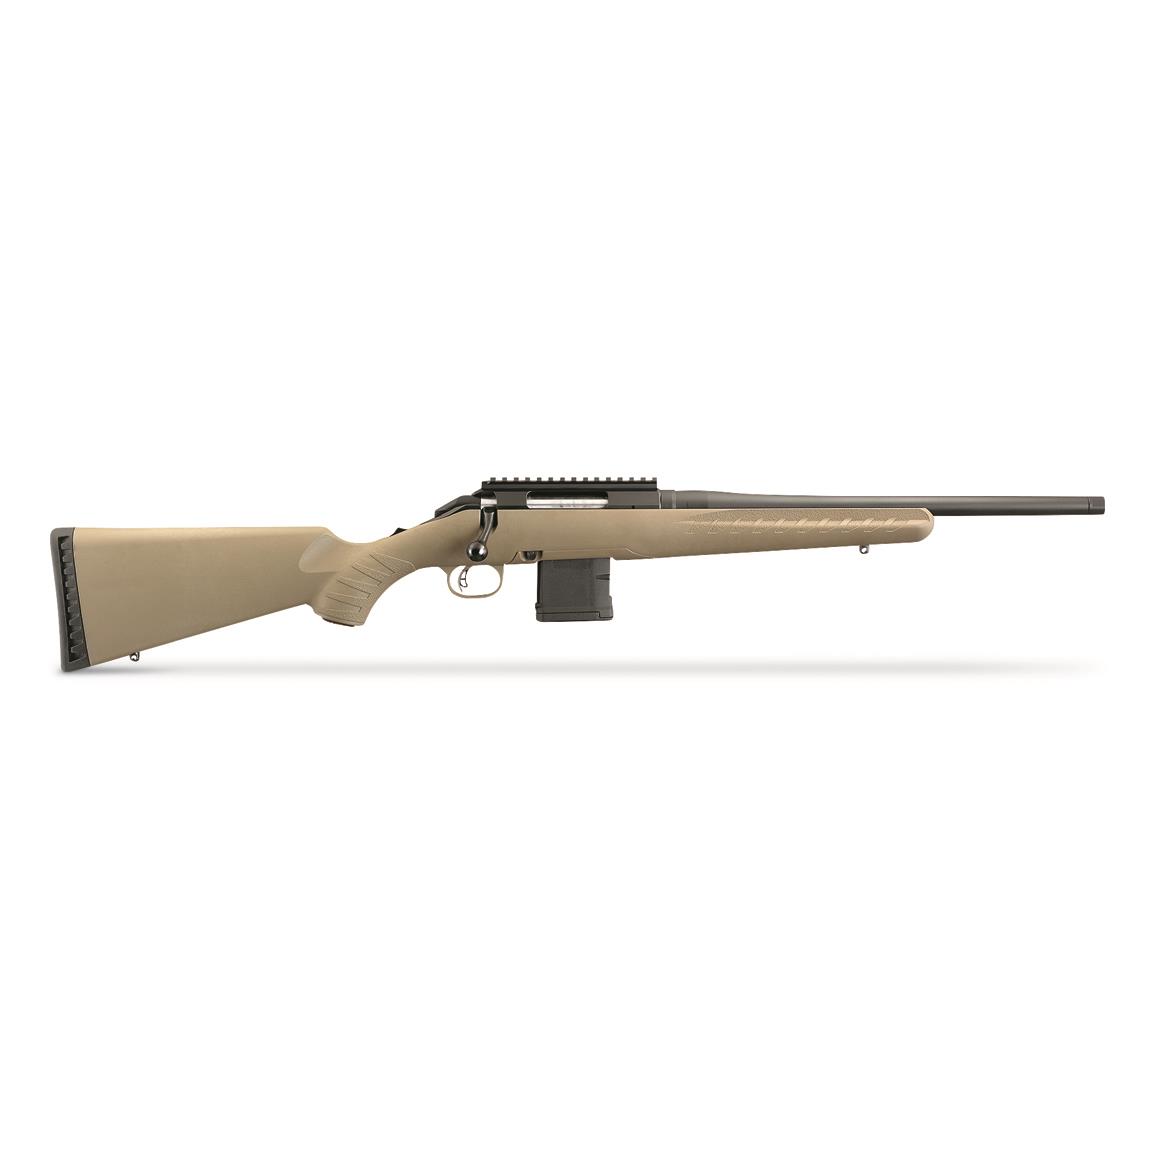 Ruger American Rifle Ranch, Bolt Action, 5.56 NATO/.223 Remington, 16.12" Barrel, 10+1 Rounds